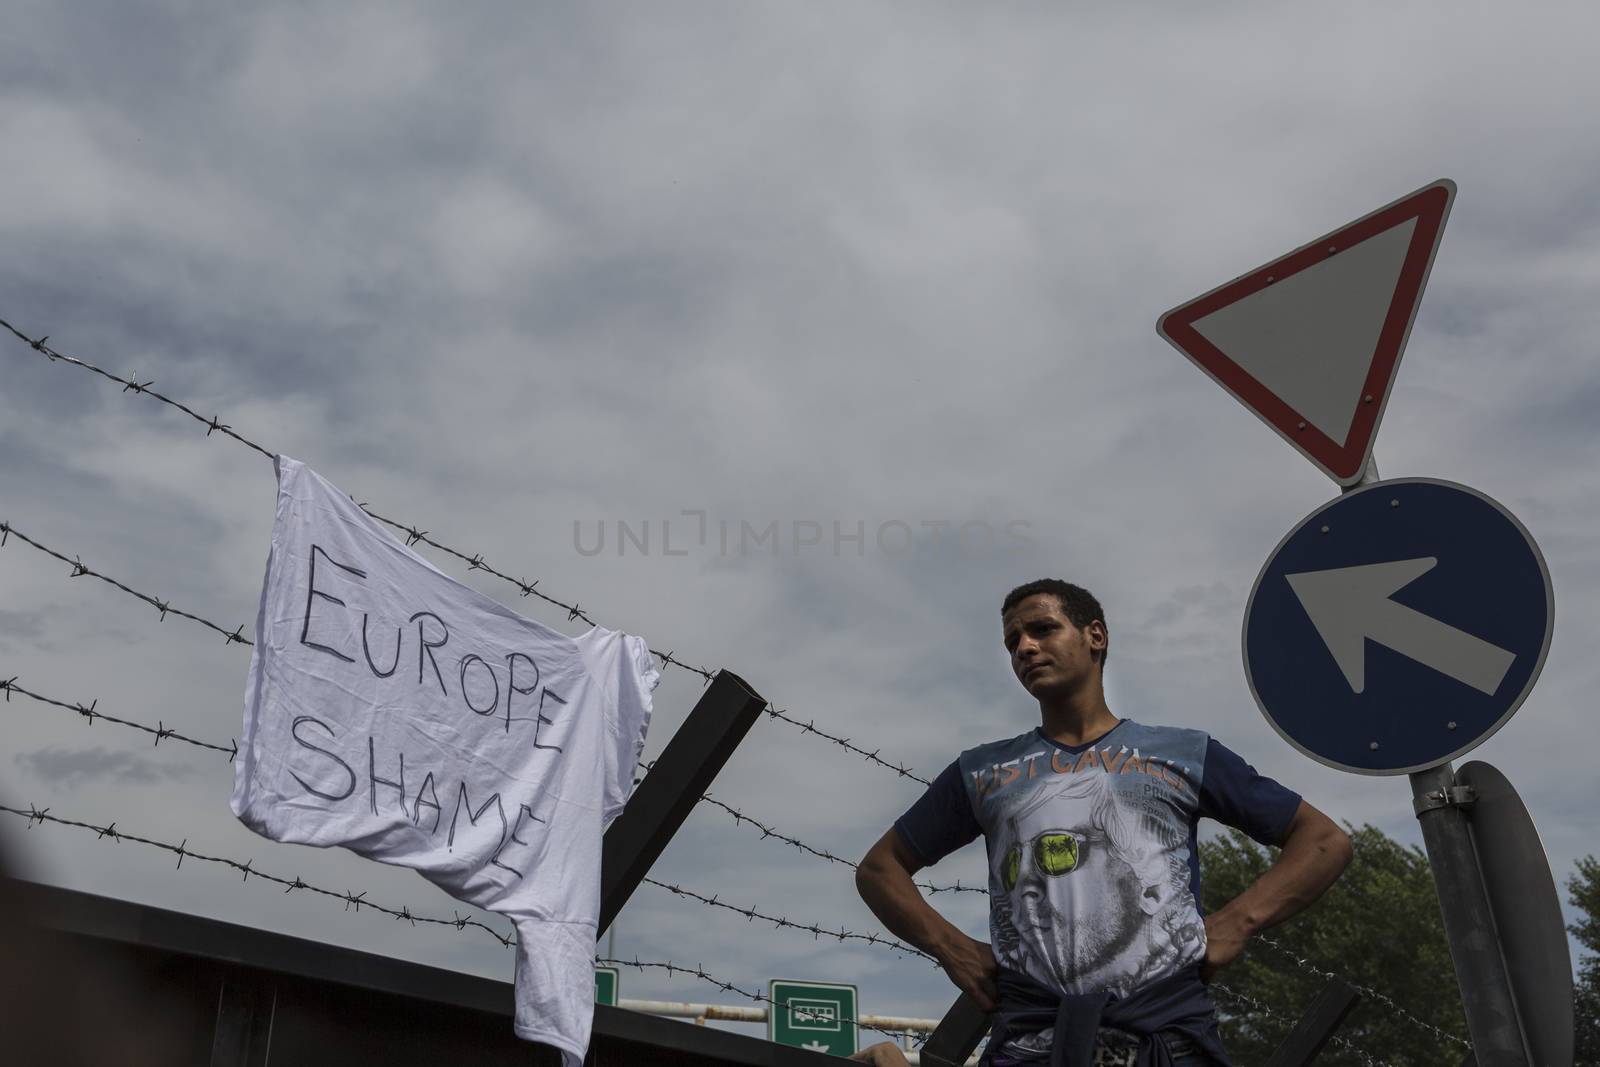 SERBIA, Horgos: A refugee stands beside a sign that reads EUROPE SHAME at the Serbia-Hungary border, after Hungary closed the border crossing on September 16, 2015.****Restriction: Photo is not to be sold in Russia or Asia****